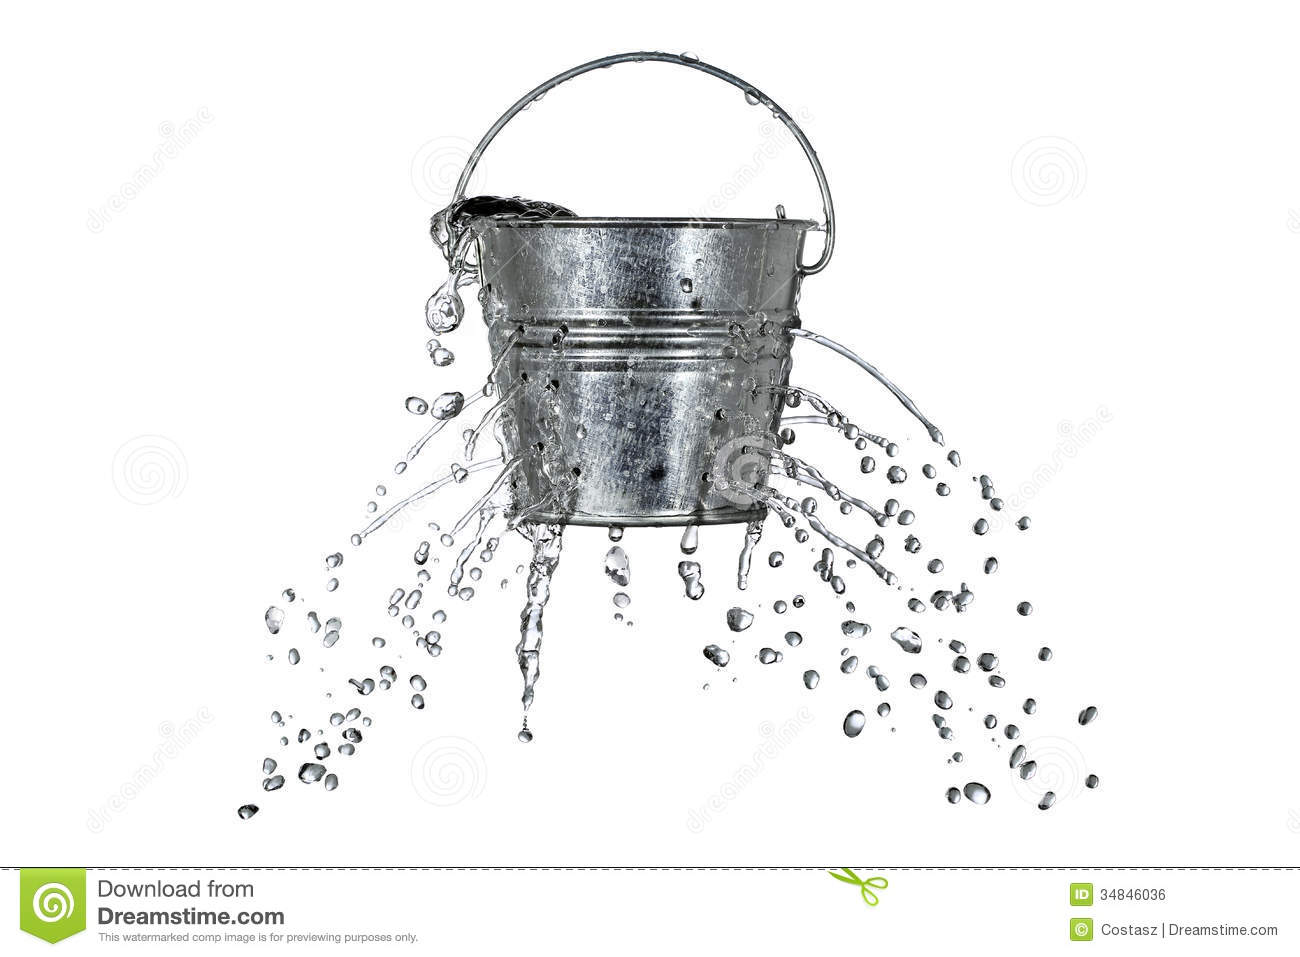 Bucket With Holes Royalty Free Stock Image   Image  34846036